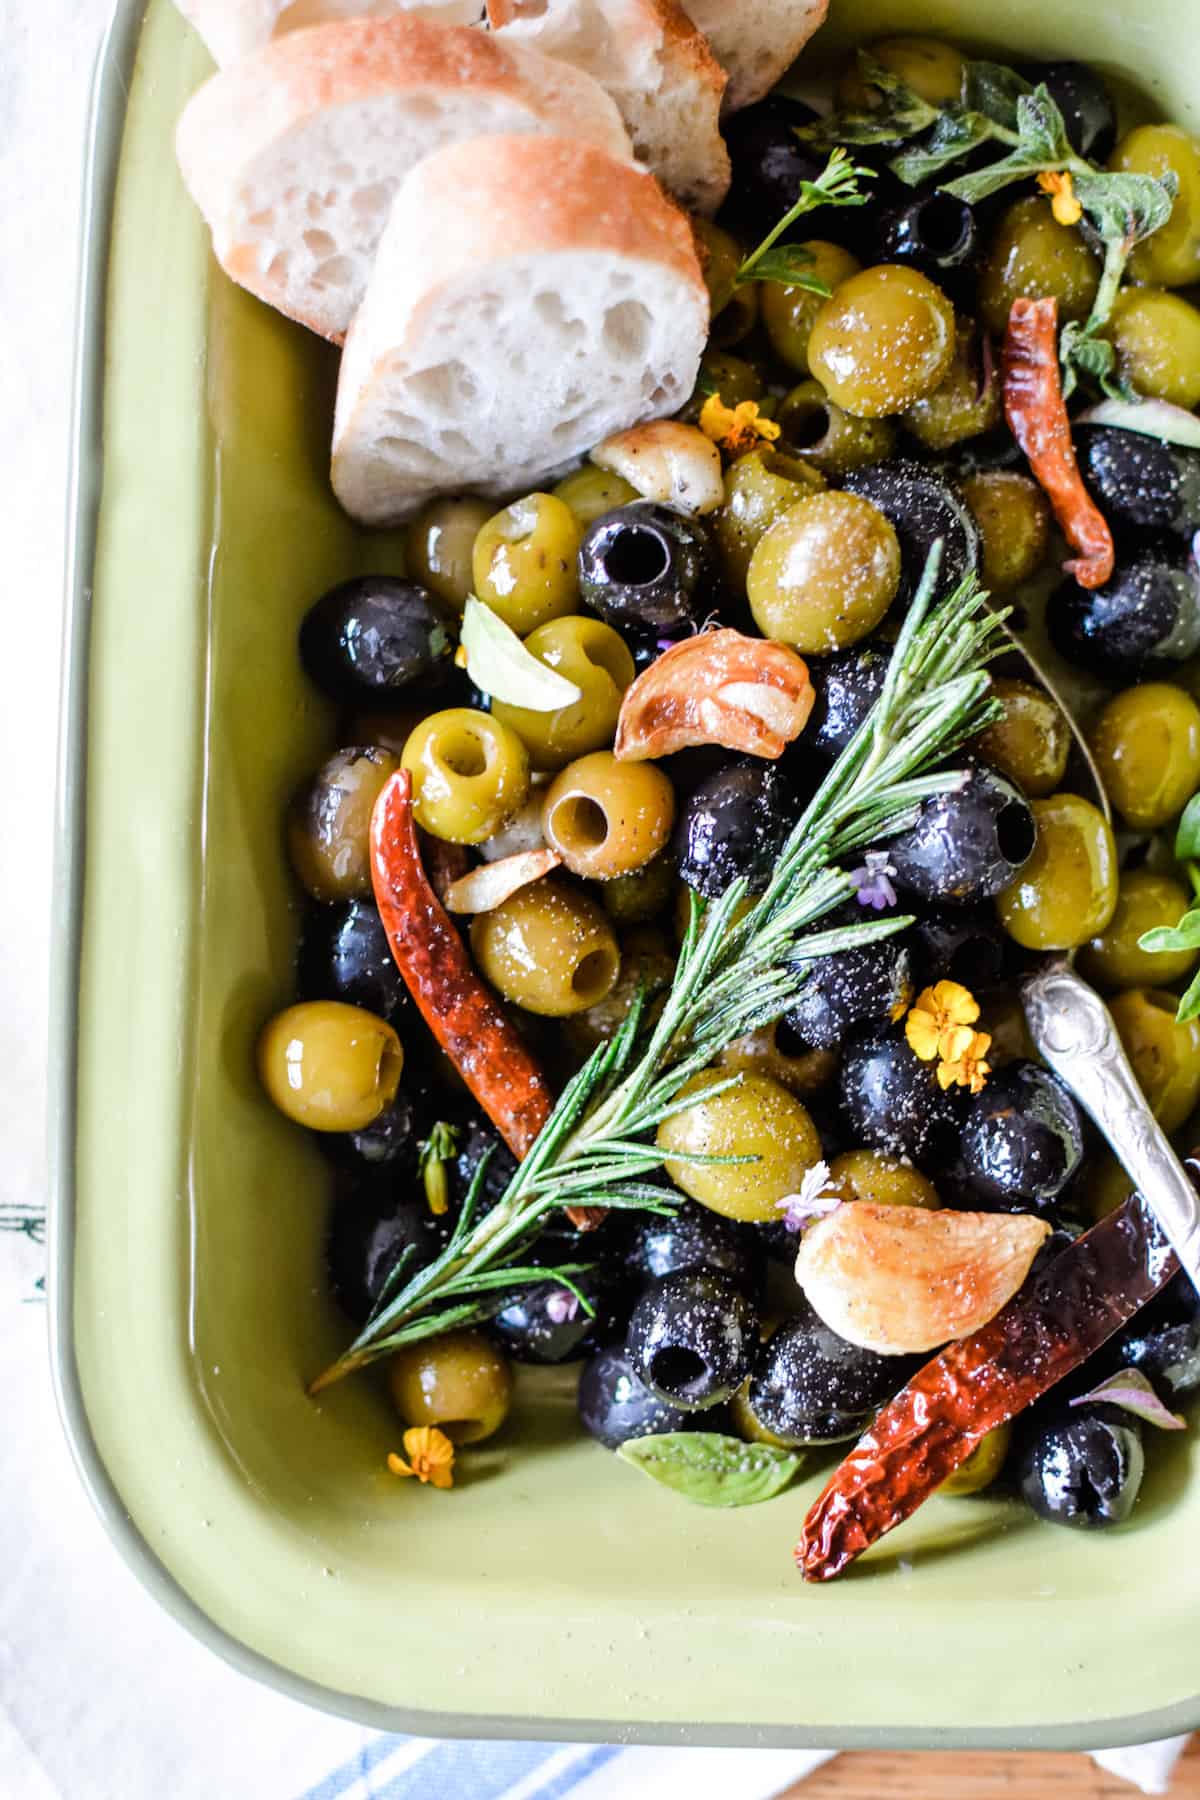 Olive Lovers Unite! You've got to try these Spicy Marinated Olives with fiery dried arbol chiles, pan-roasted cloves of garlic and loads of fresh herbs like rosemary and oregano. Fix this when you need a quick, easy & comforting appetizer to share with friends that will disappear in minutes. Serve warm or make ahead and serve room temperature with slices of crusty baguette for scooping. {gluten-free, grain-free, and vegan} #olives #marinatedolives #spicy #appetizer #roastedgarlic #easyappetizer